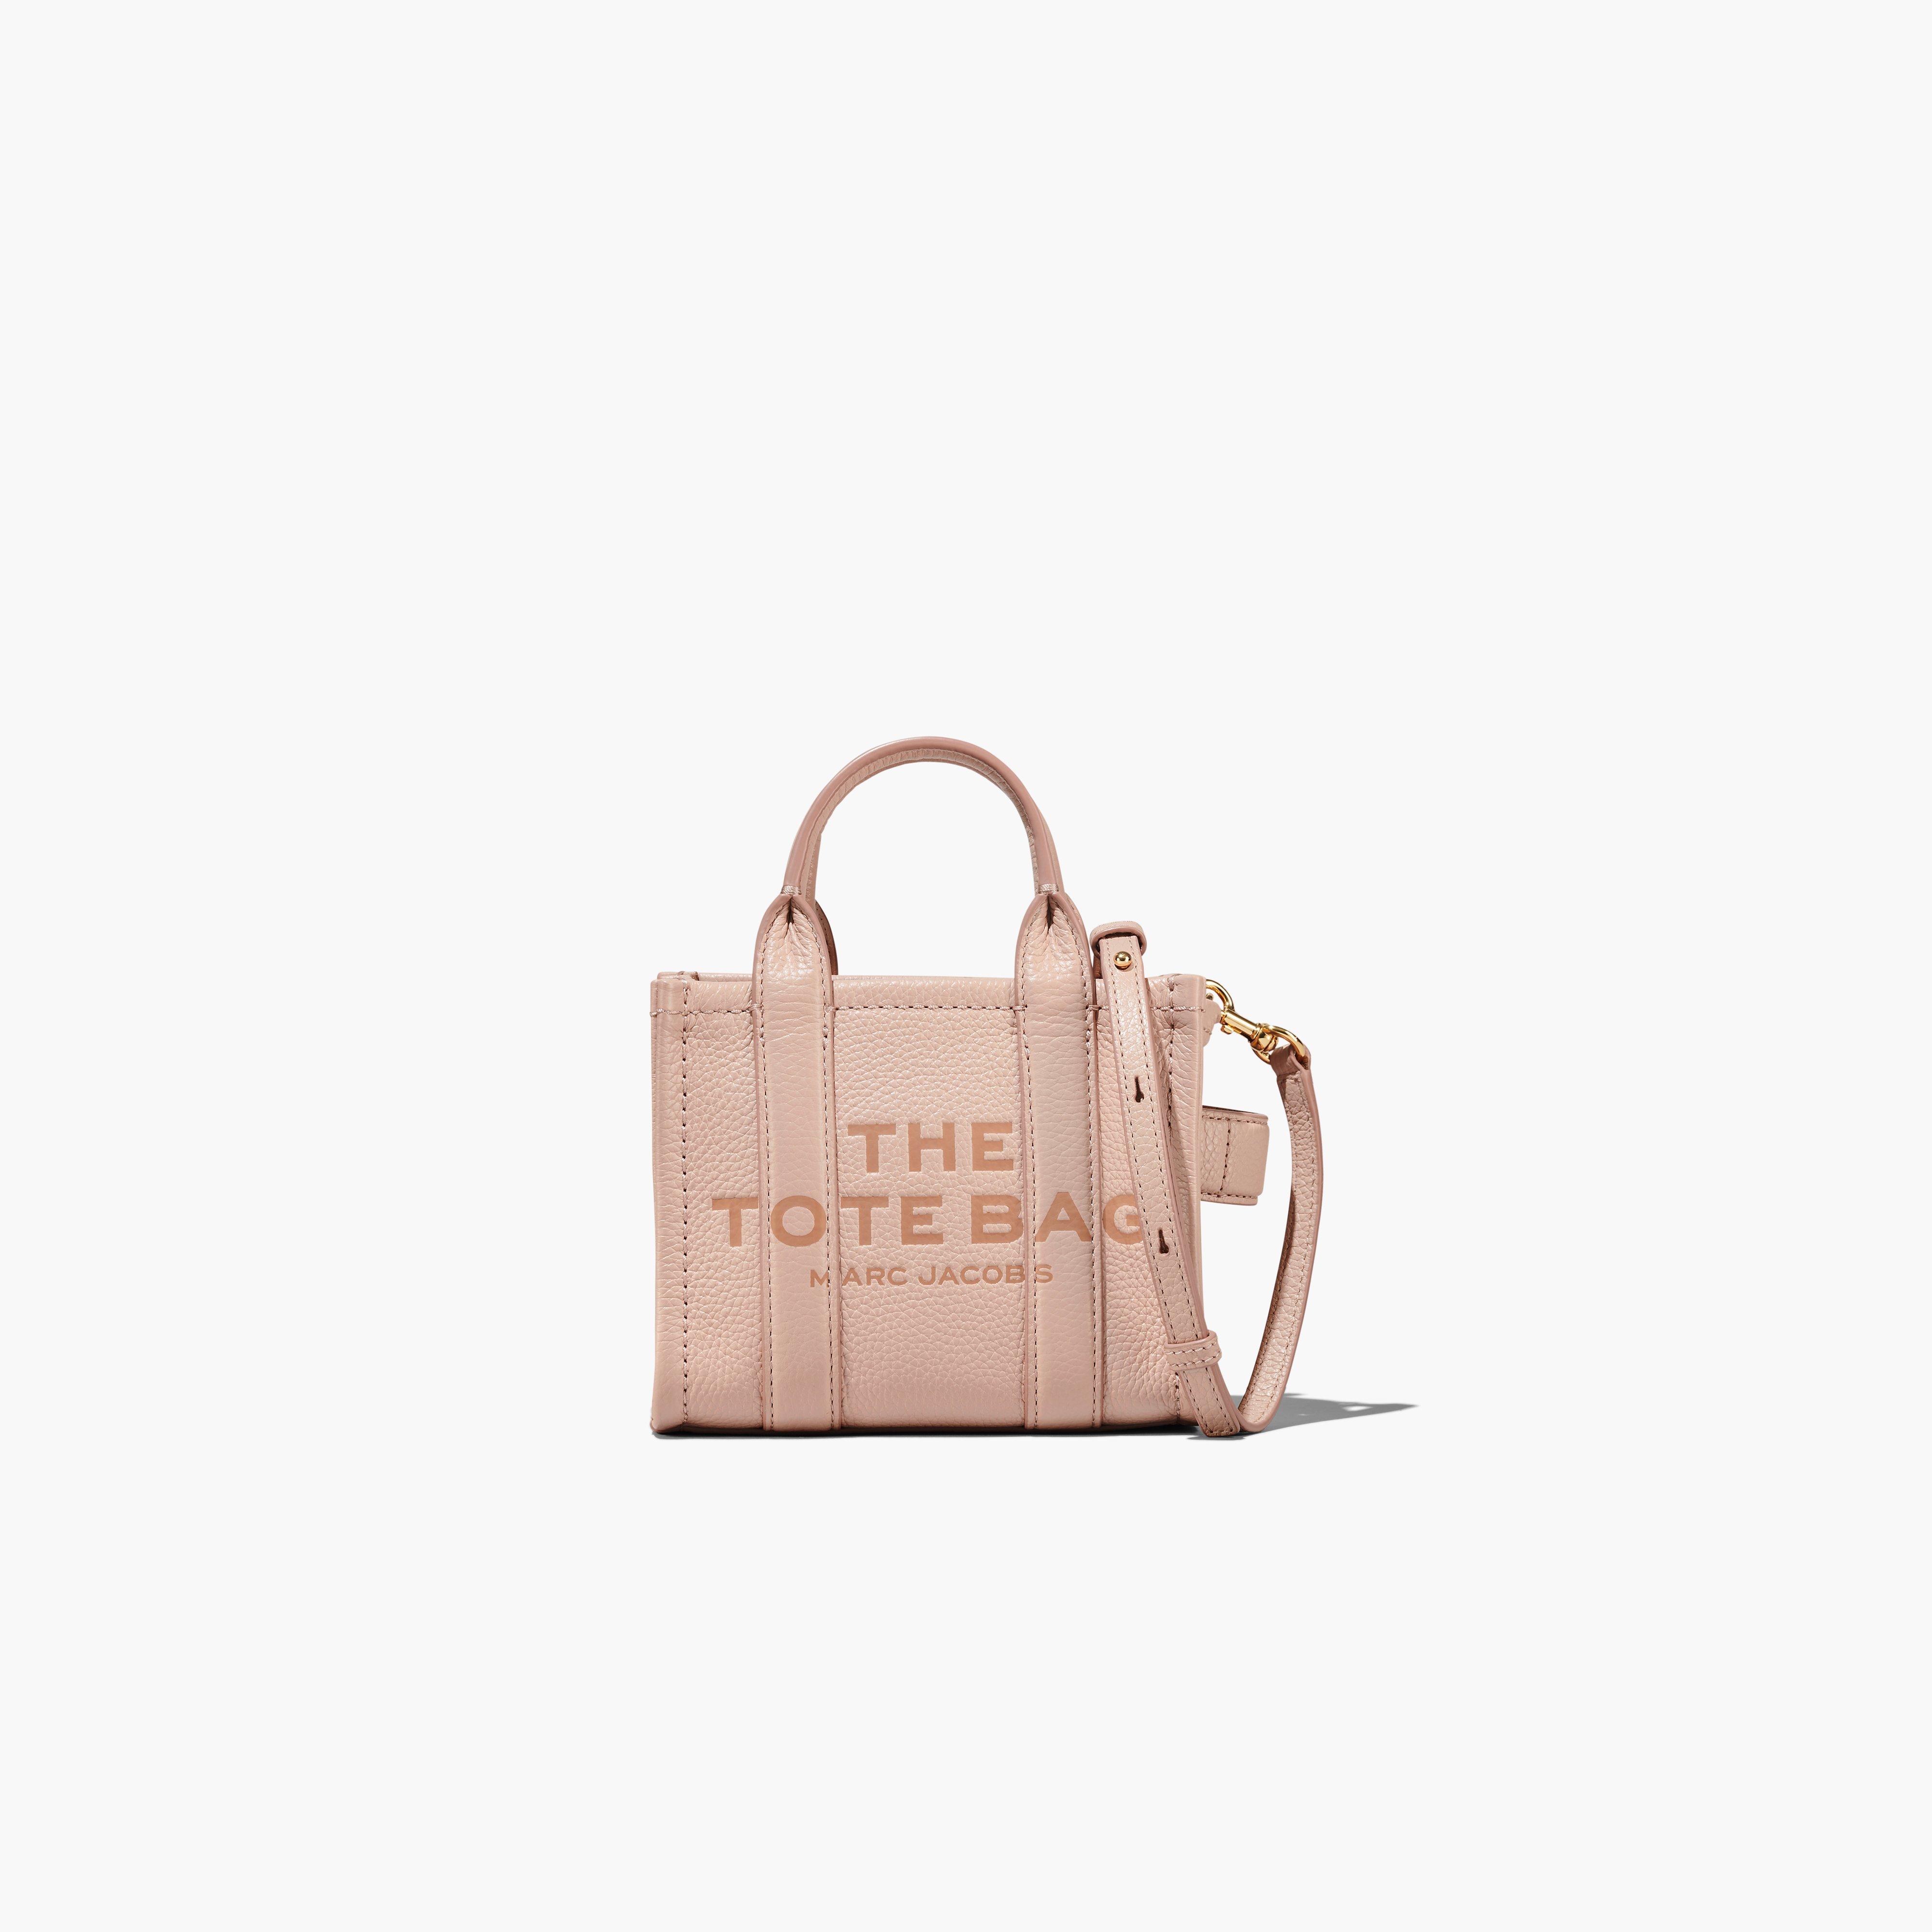 Marc by Marc jacobs The Leather Mini Tote Bag,ROSE